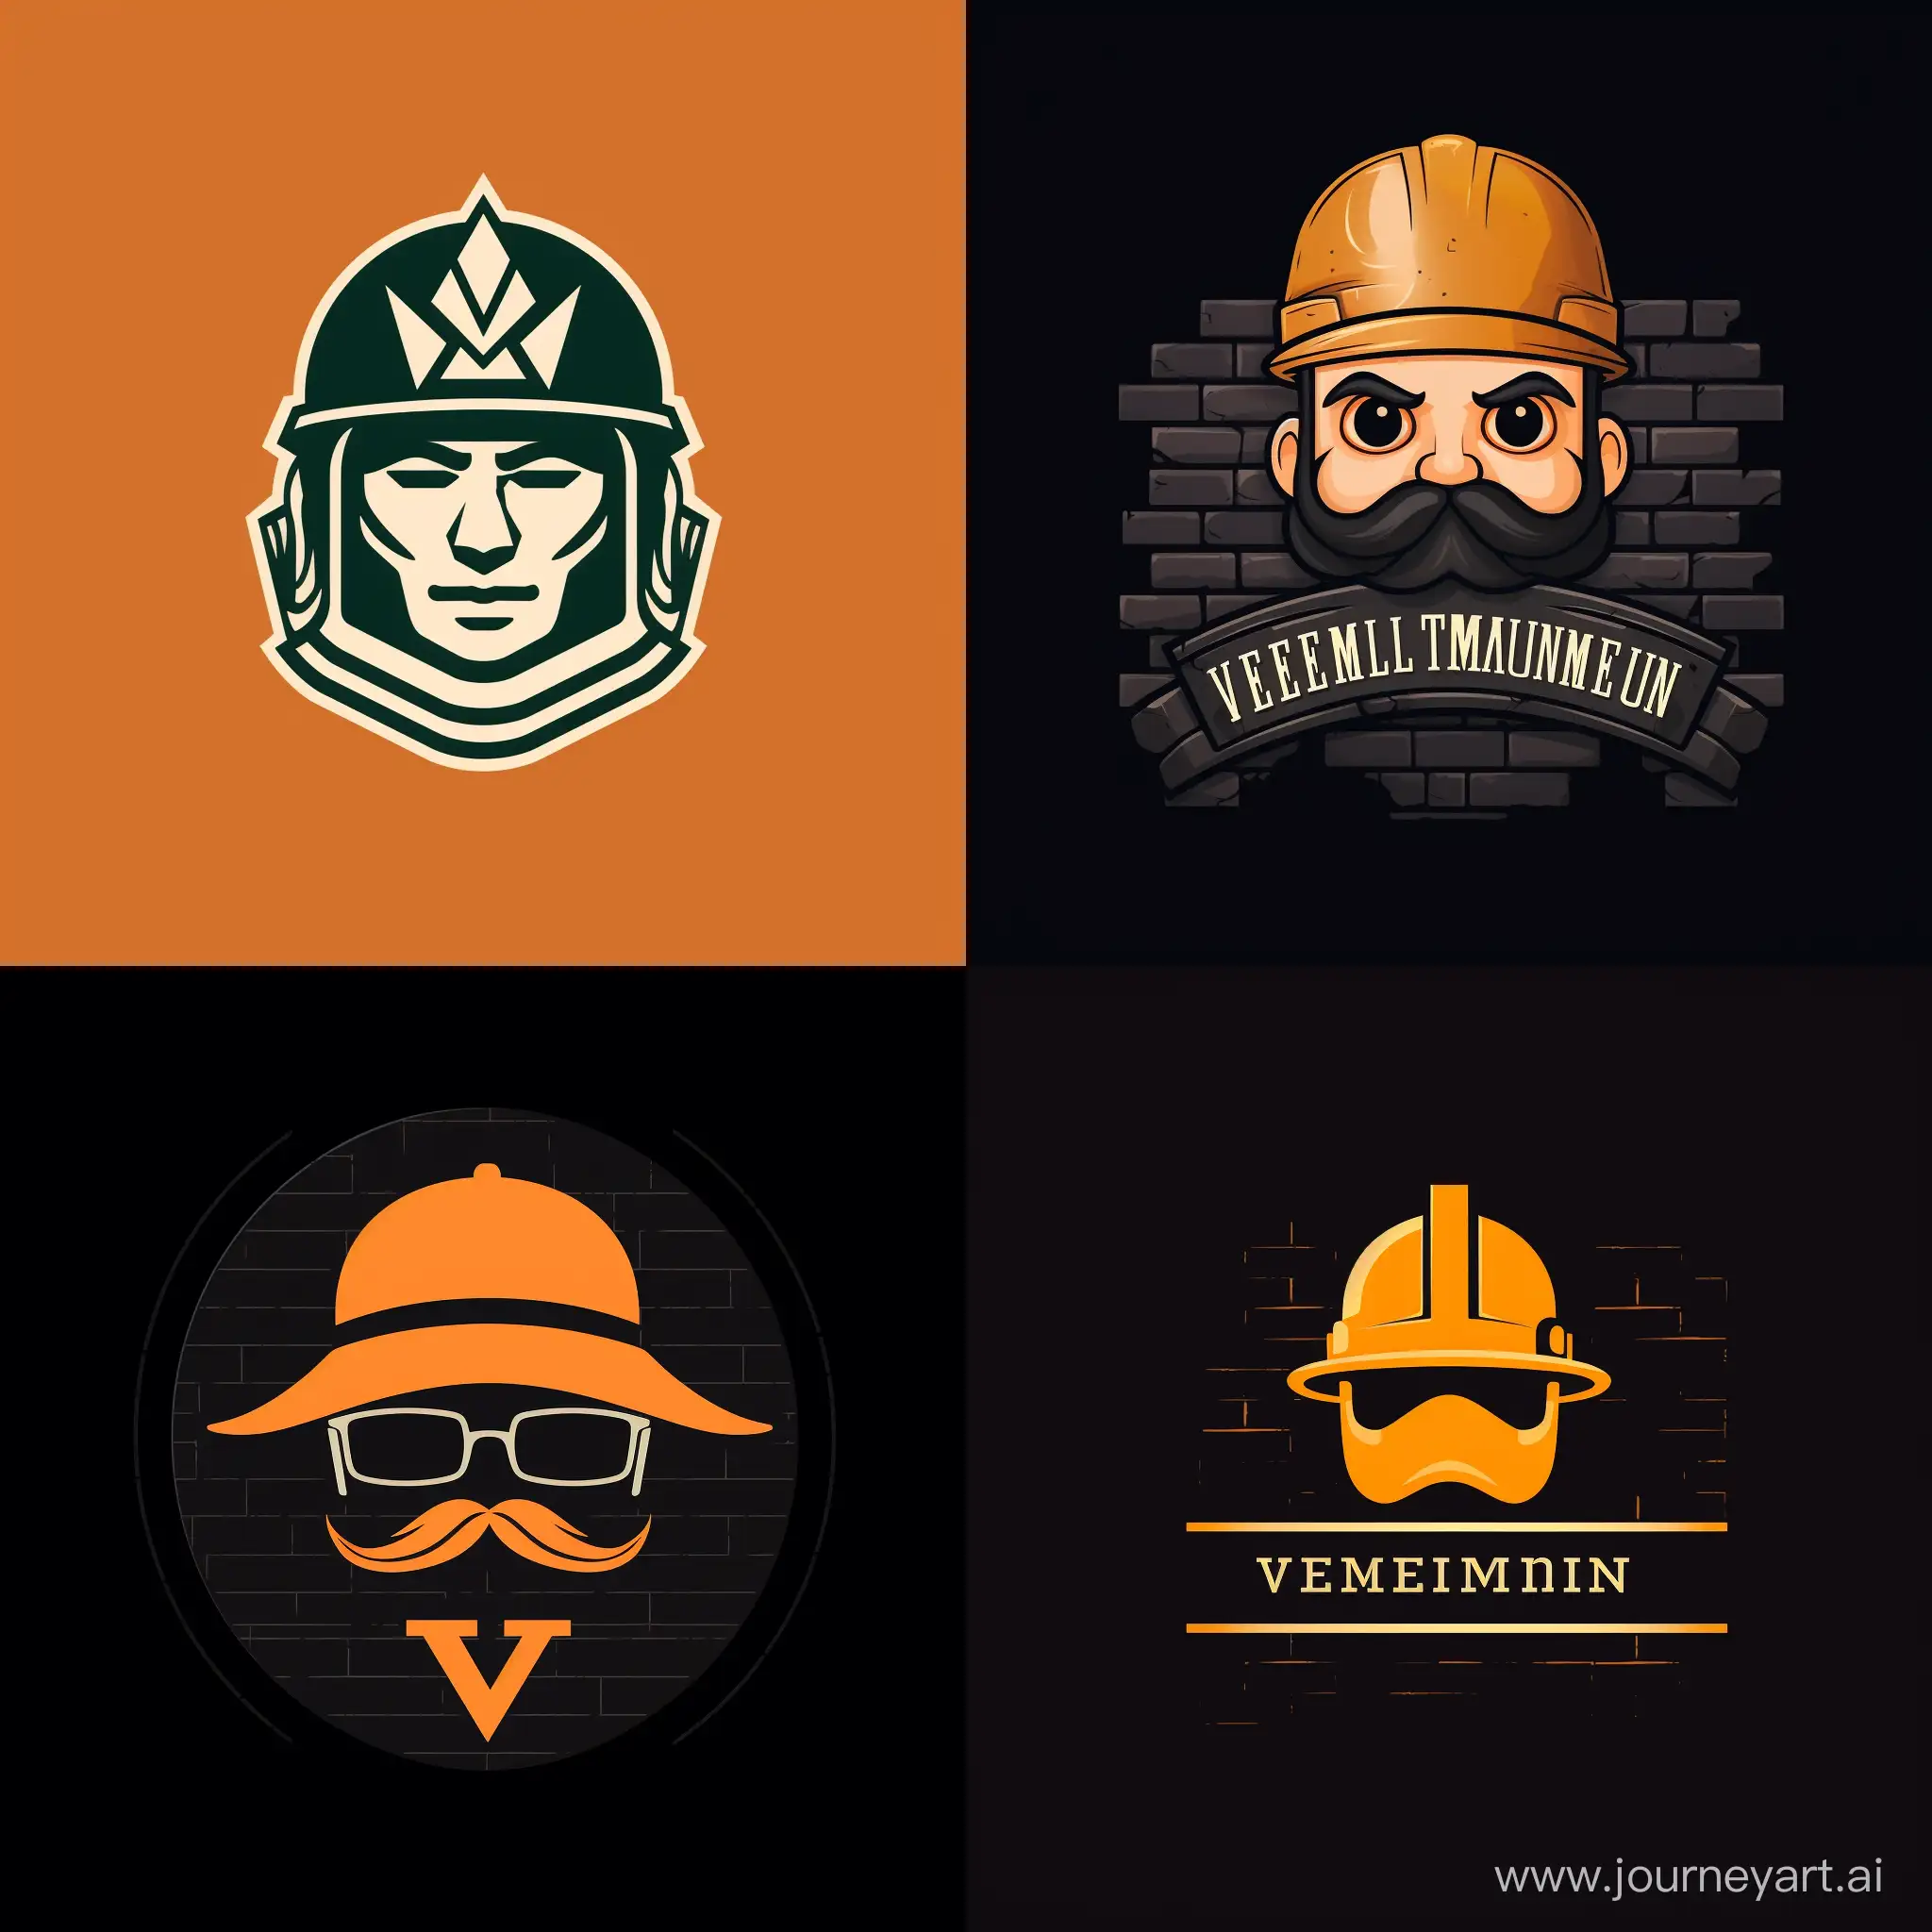 Logo for construction company called ‘Vermeulen en Vrienden’. Very stereotypical with bricks and a helmet.